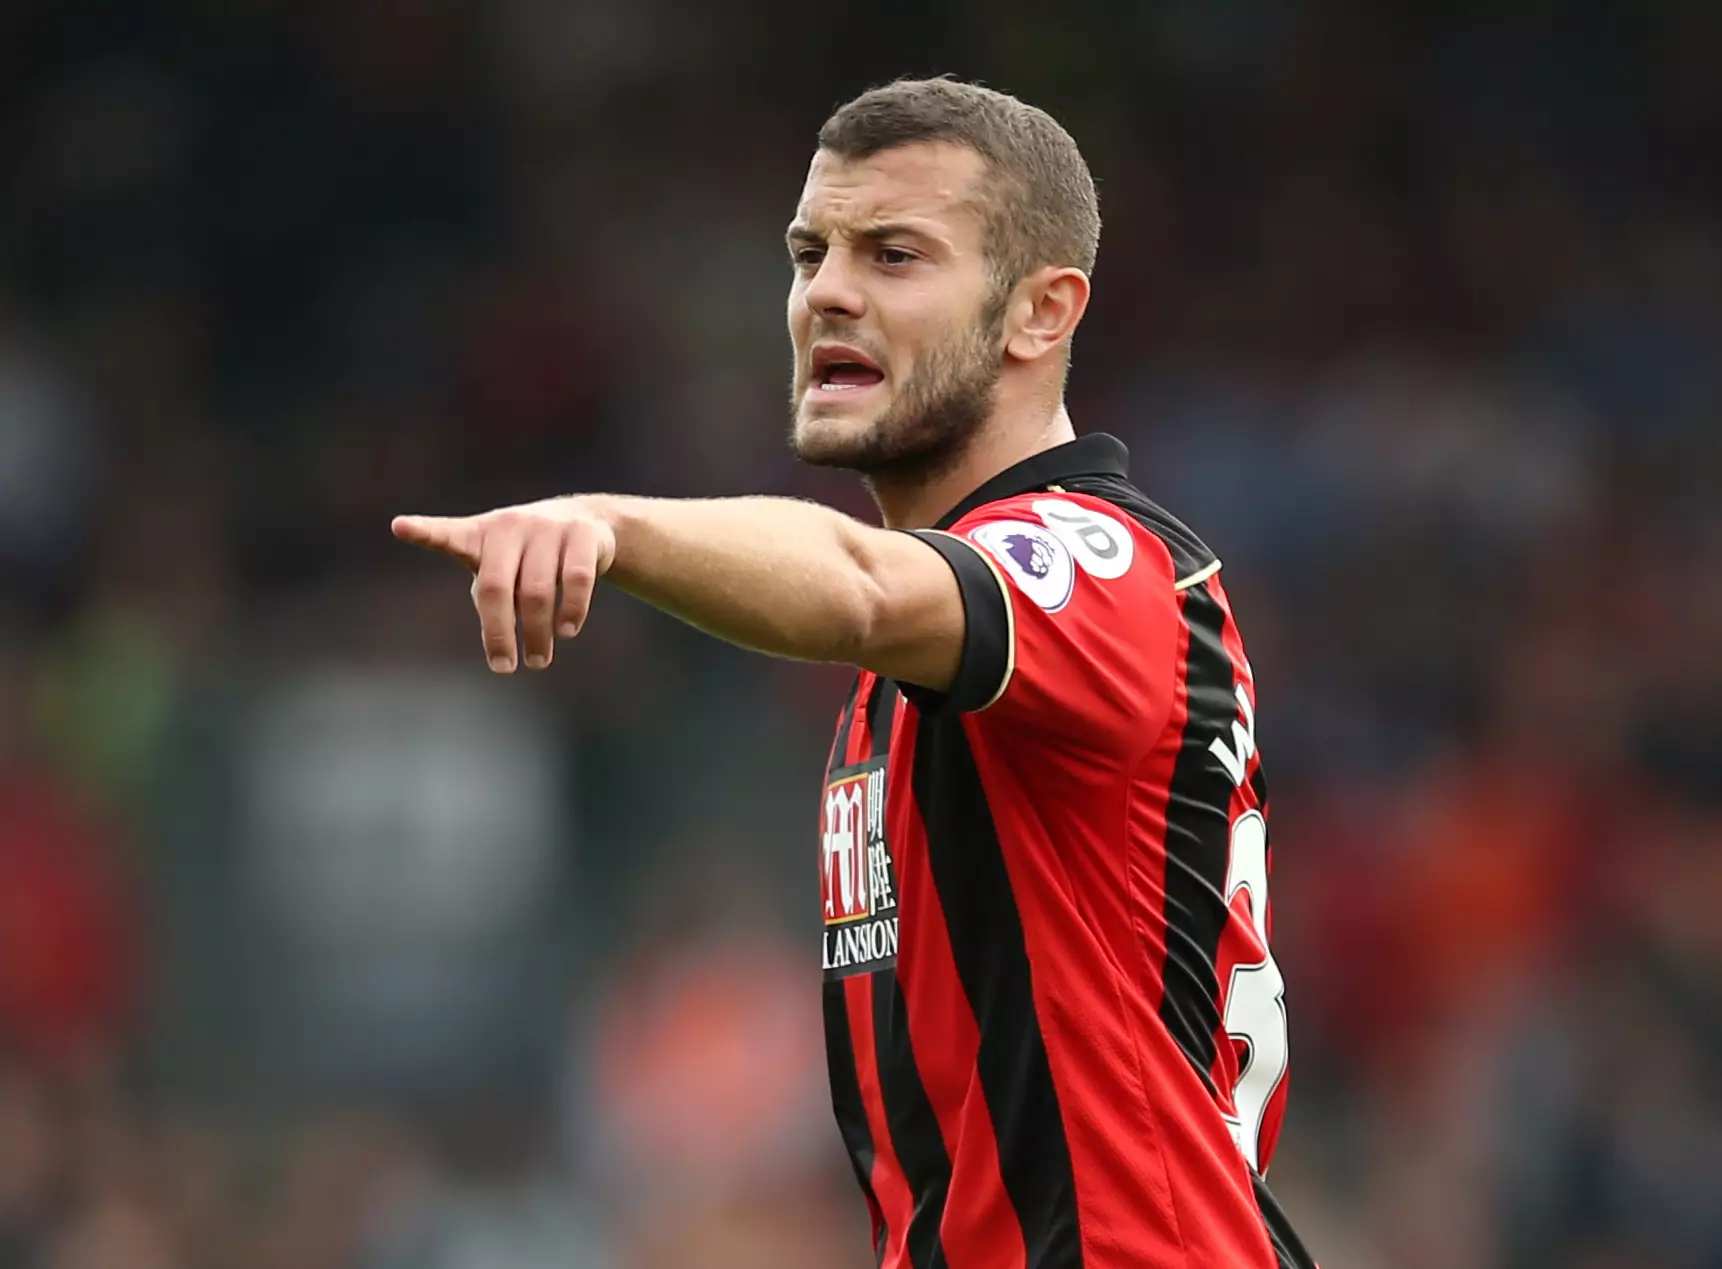 Jack Wilshere's Comments About Chelsea Will Infuriate Arsenal Fans